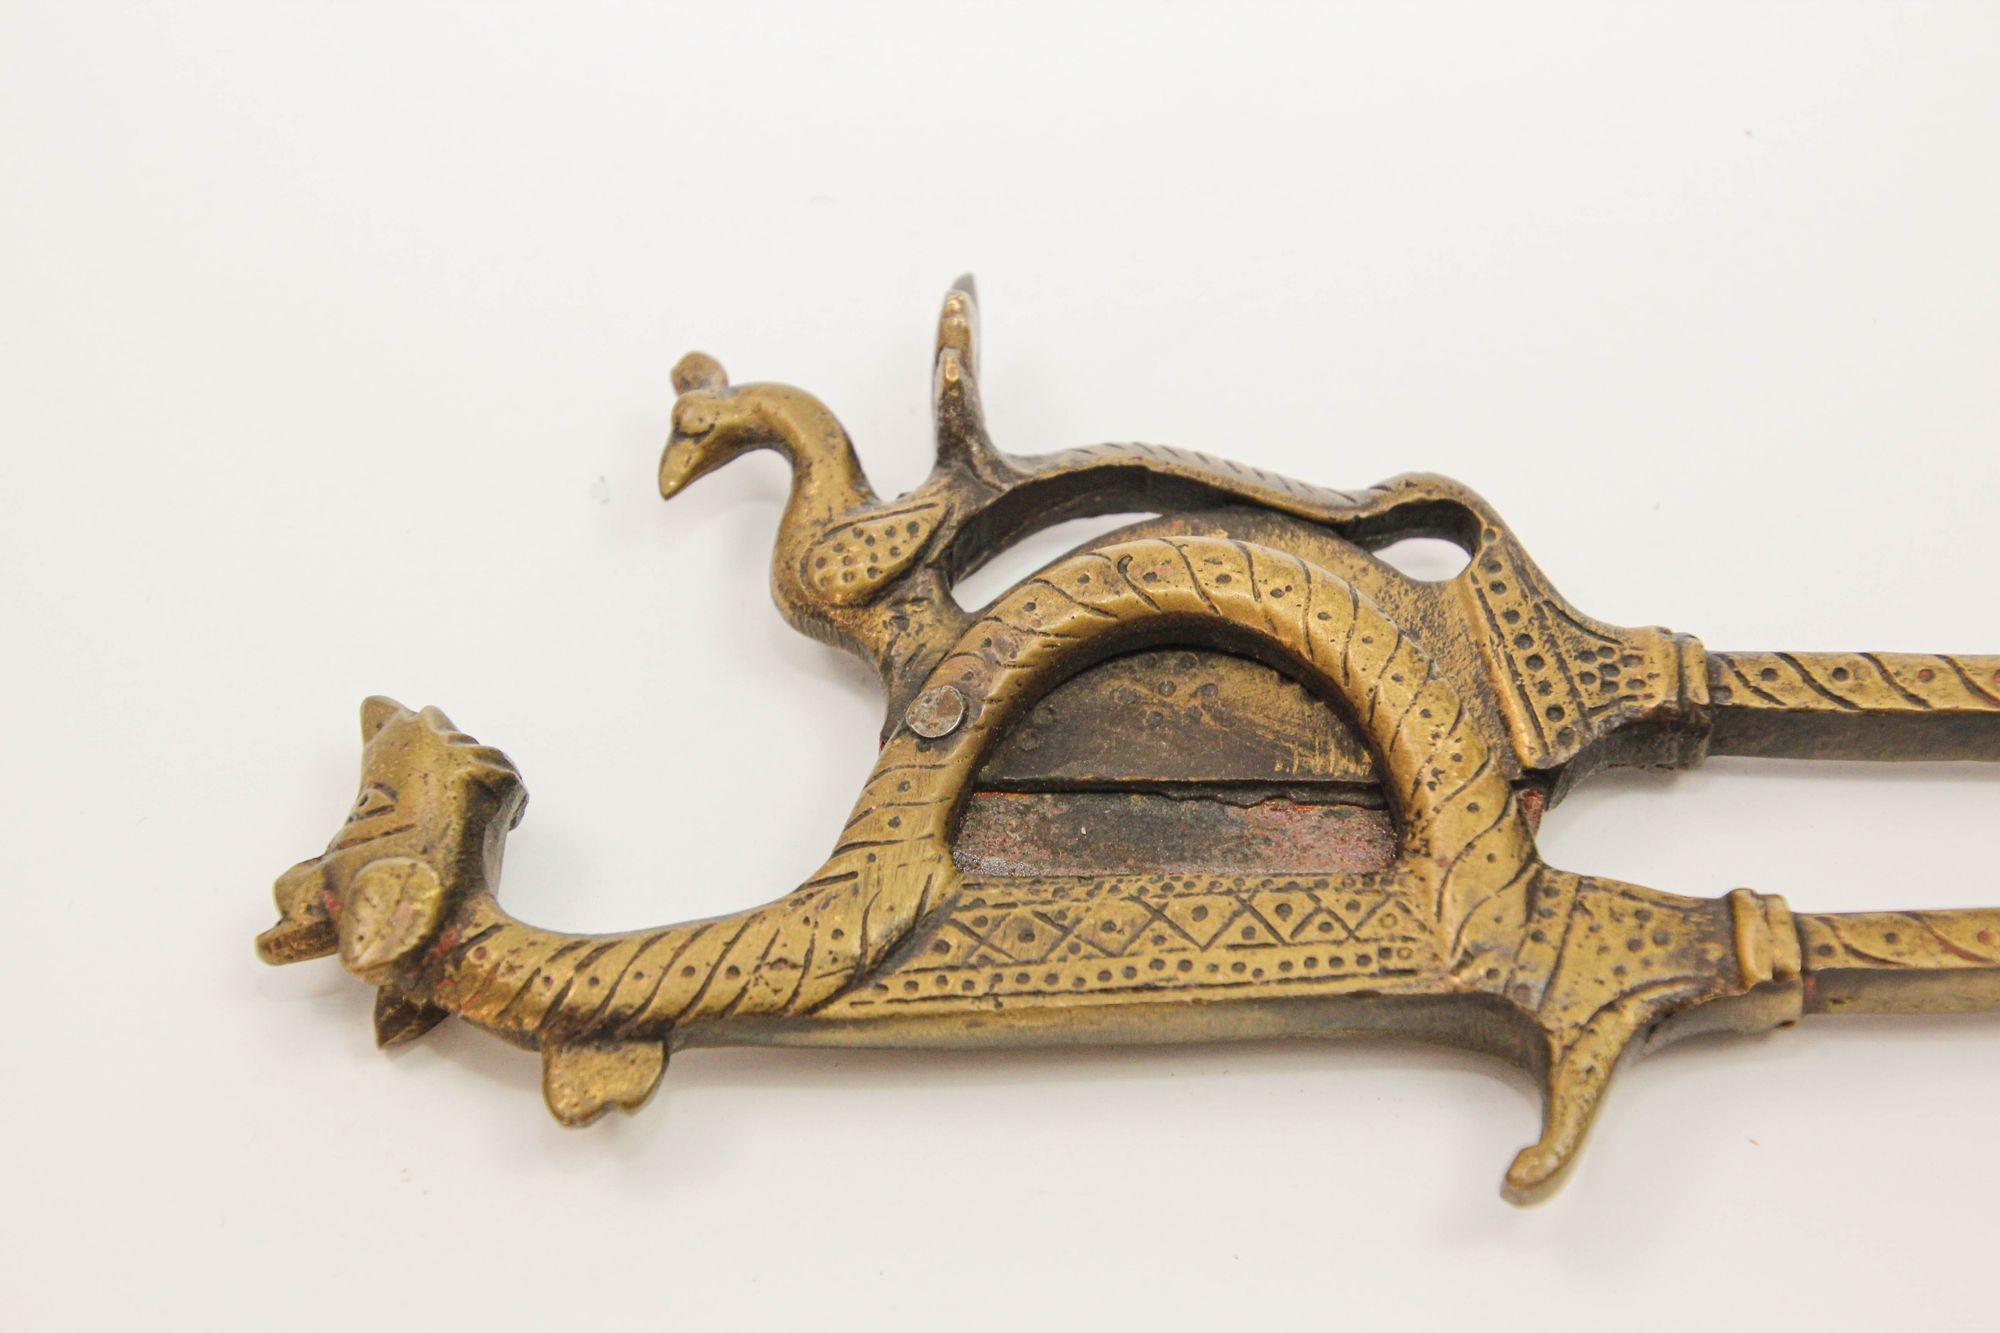 Antique betel nut cutters crafted in bronze originating from India, specifically designed for cutting betel palm, seeds, areca nuts, and dry fruits. This meticulously handcrafted collectible showcases intricate artistry, fashioned from solid brass,